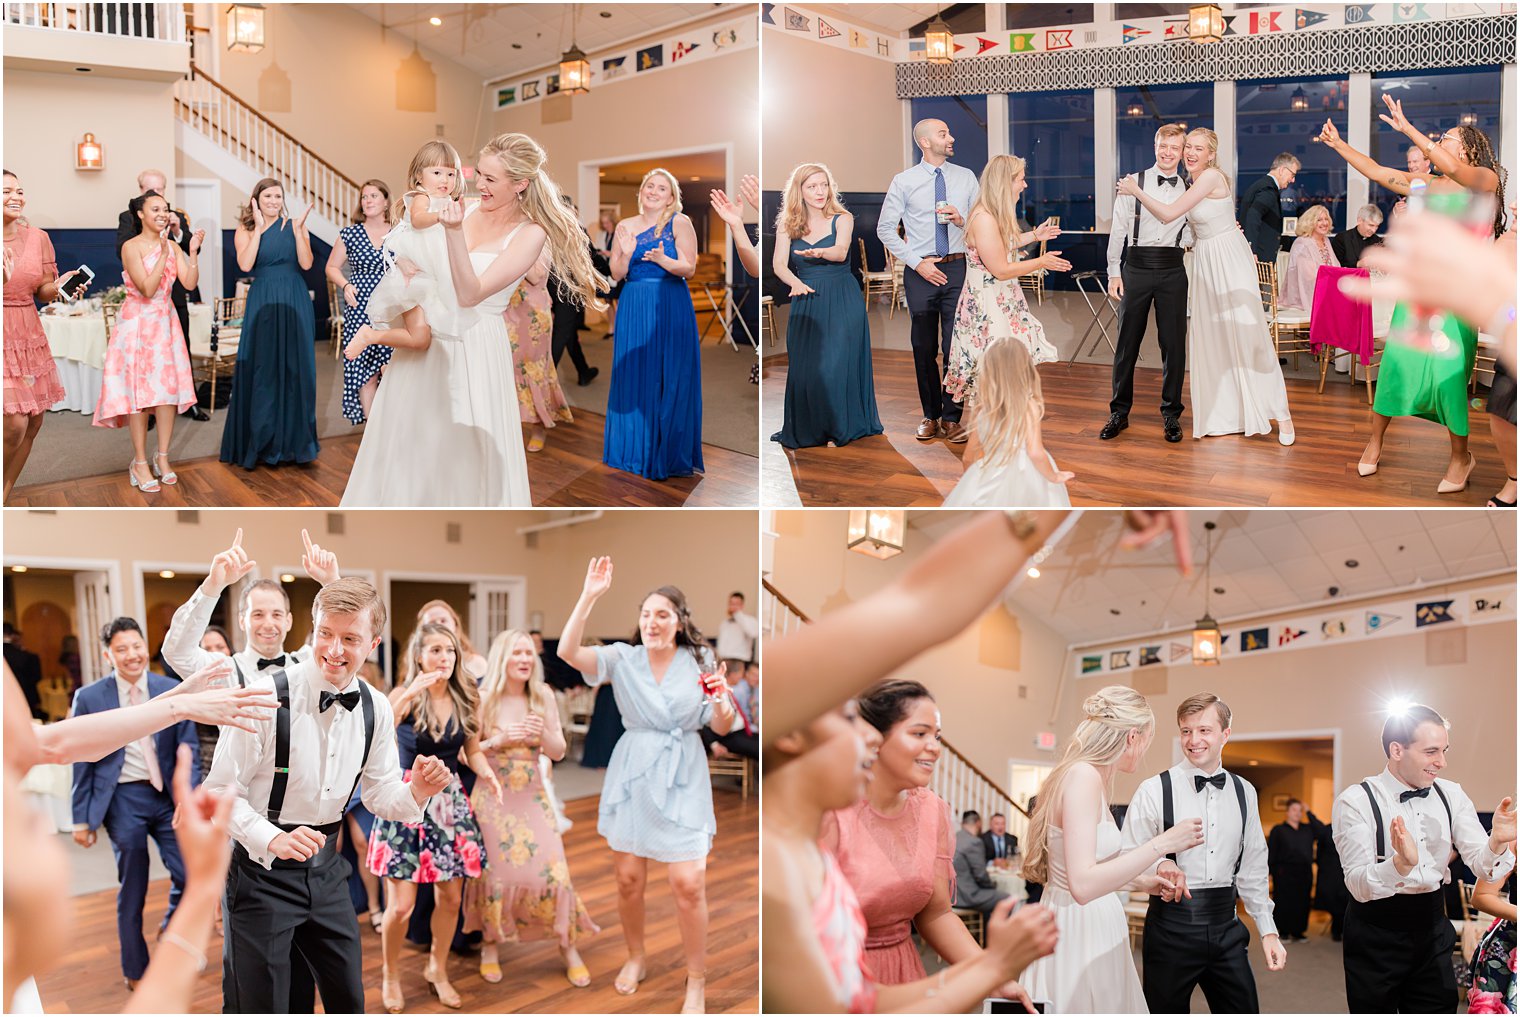 bride and groom dance with guests at wedding reception